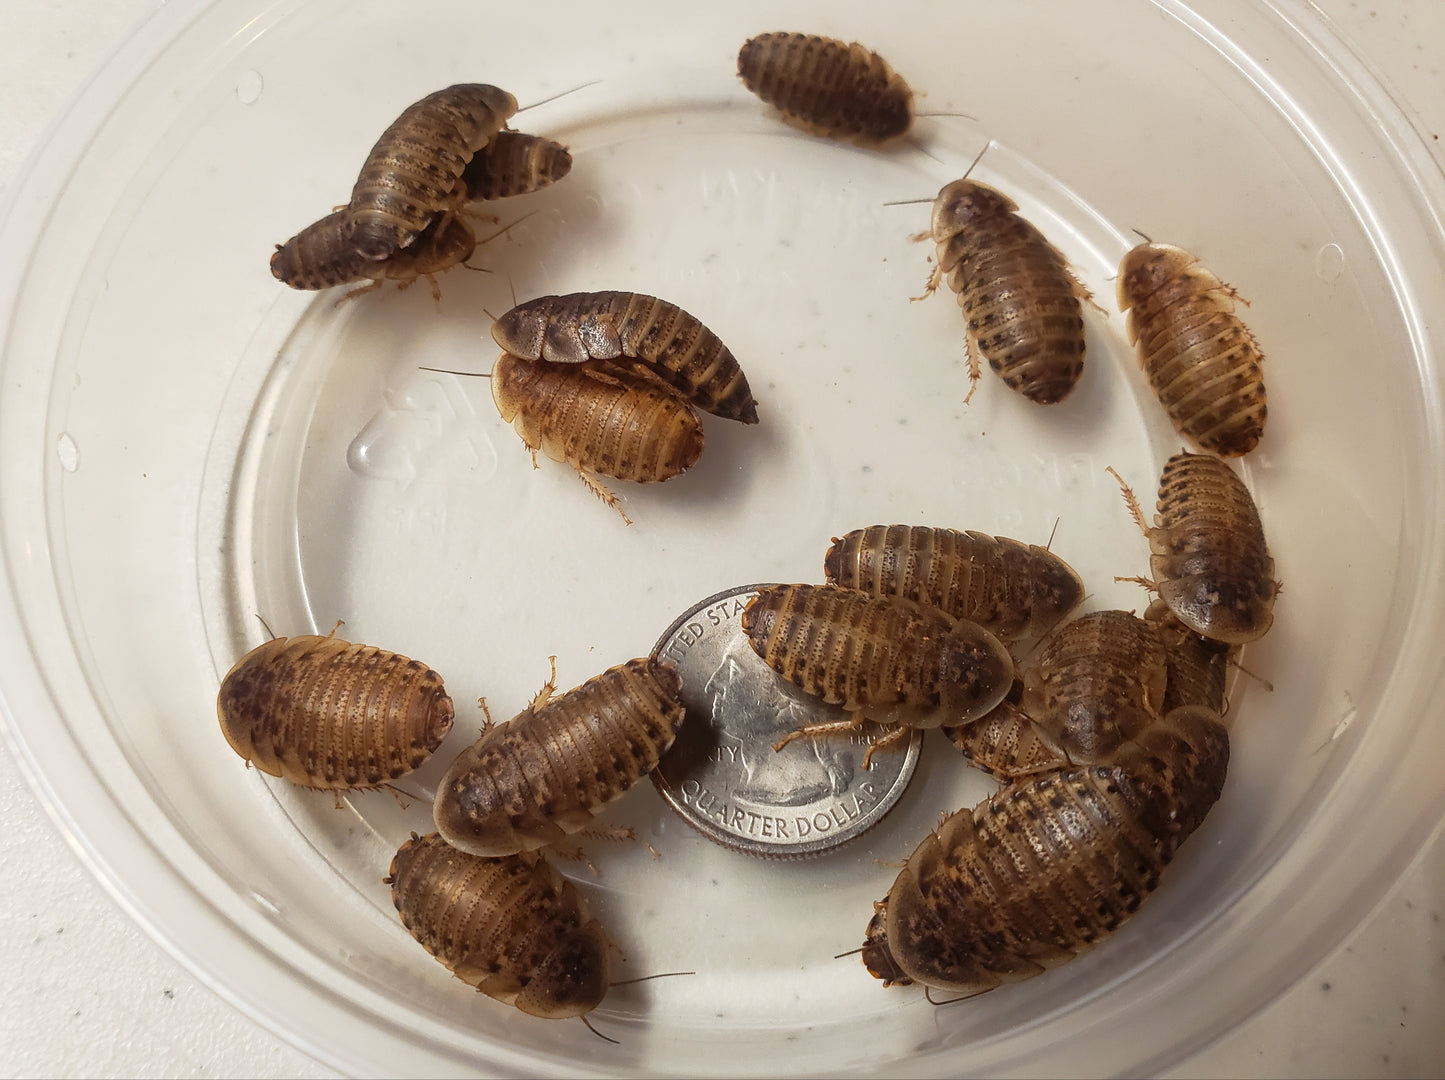 750 Large and 1000 Male Dubia Roaches